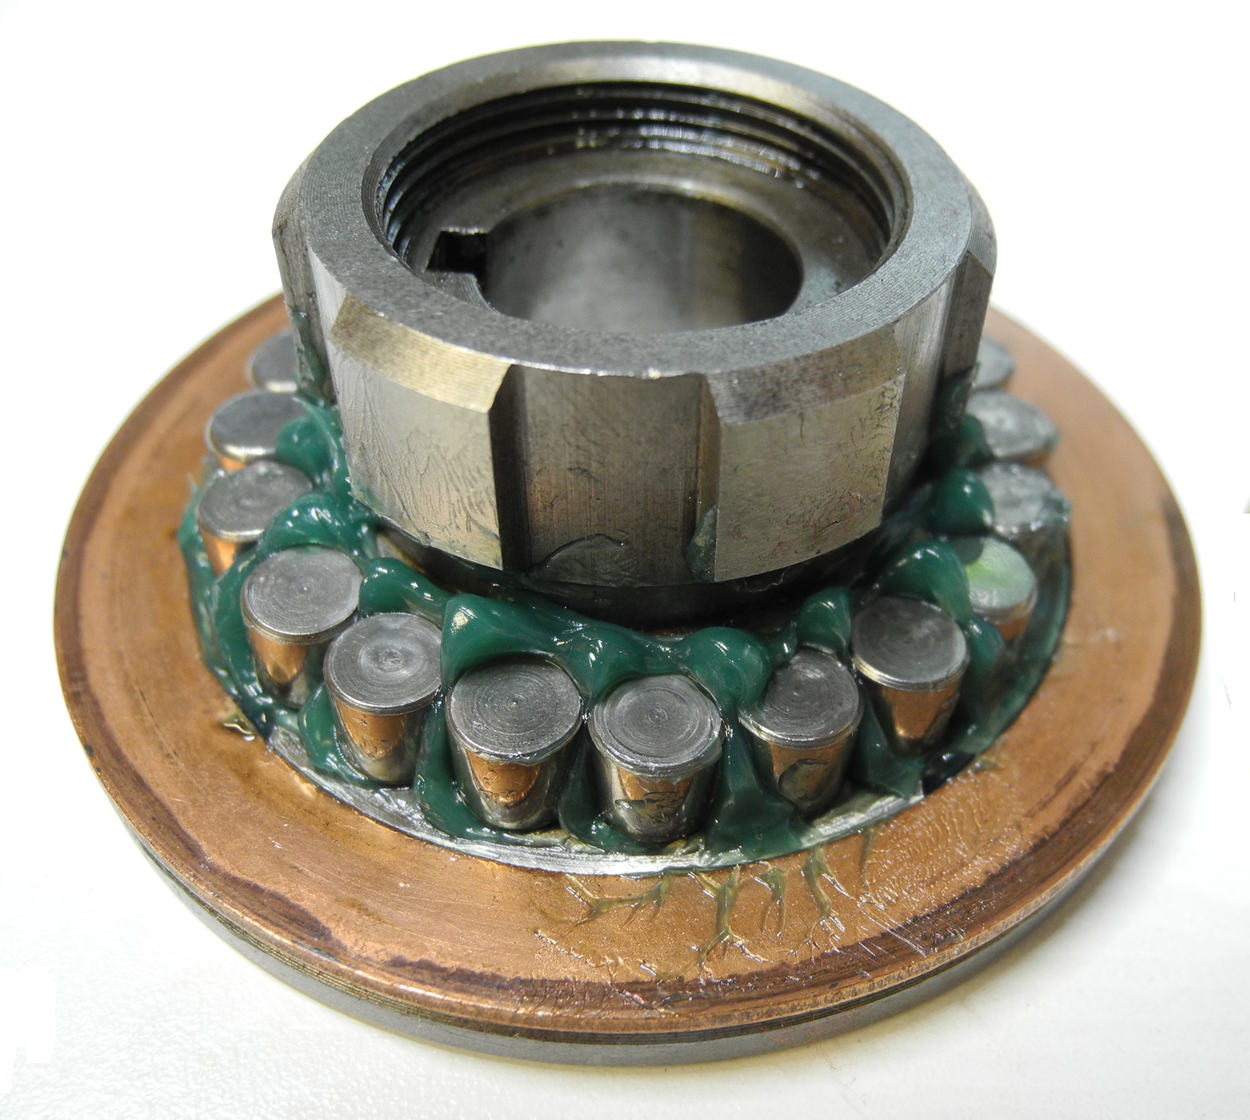 Photo showing a copper-clad thrust washer installed on the clutch hub